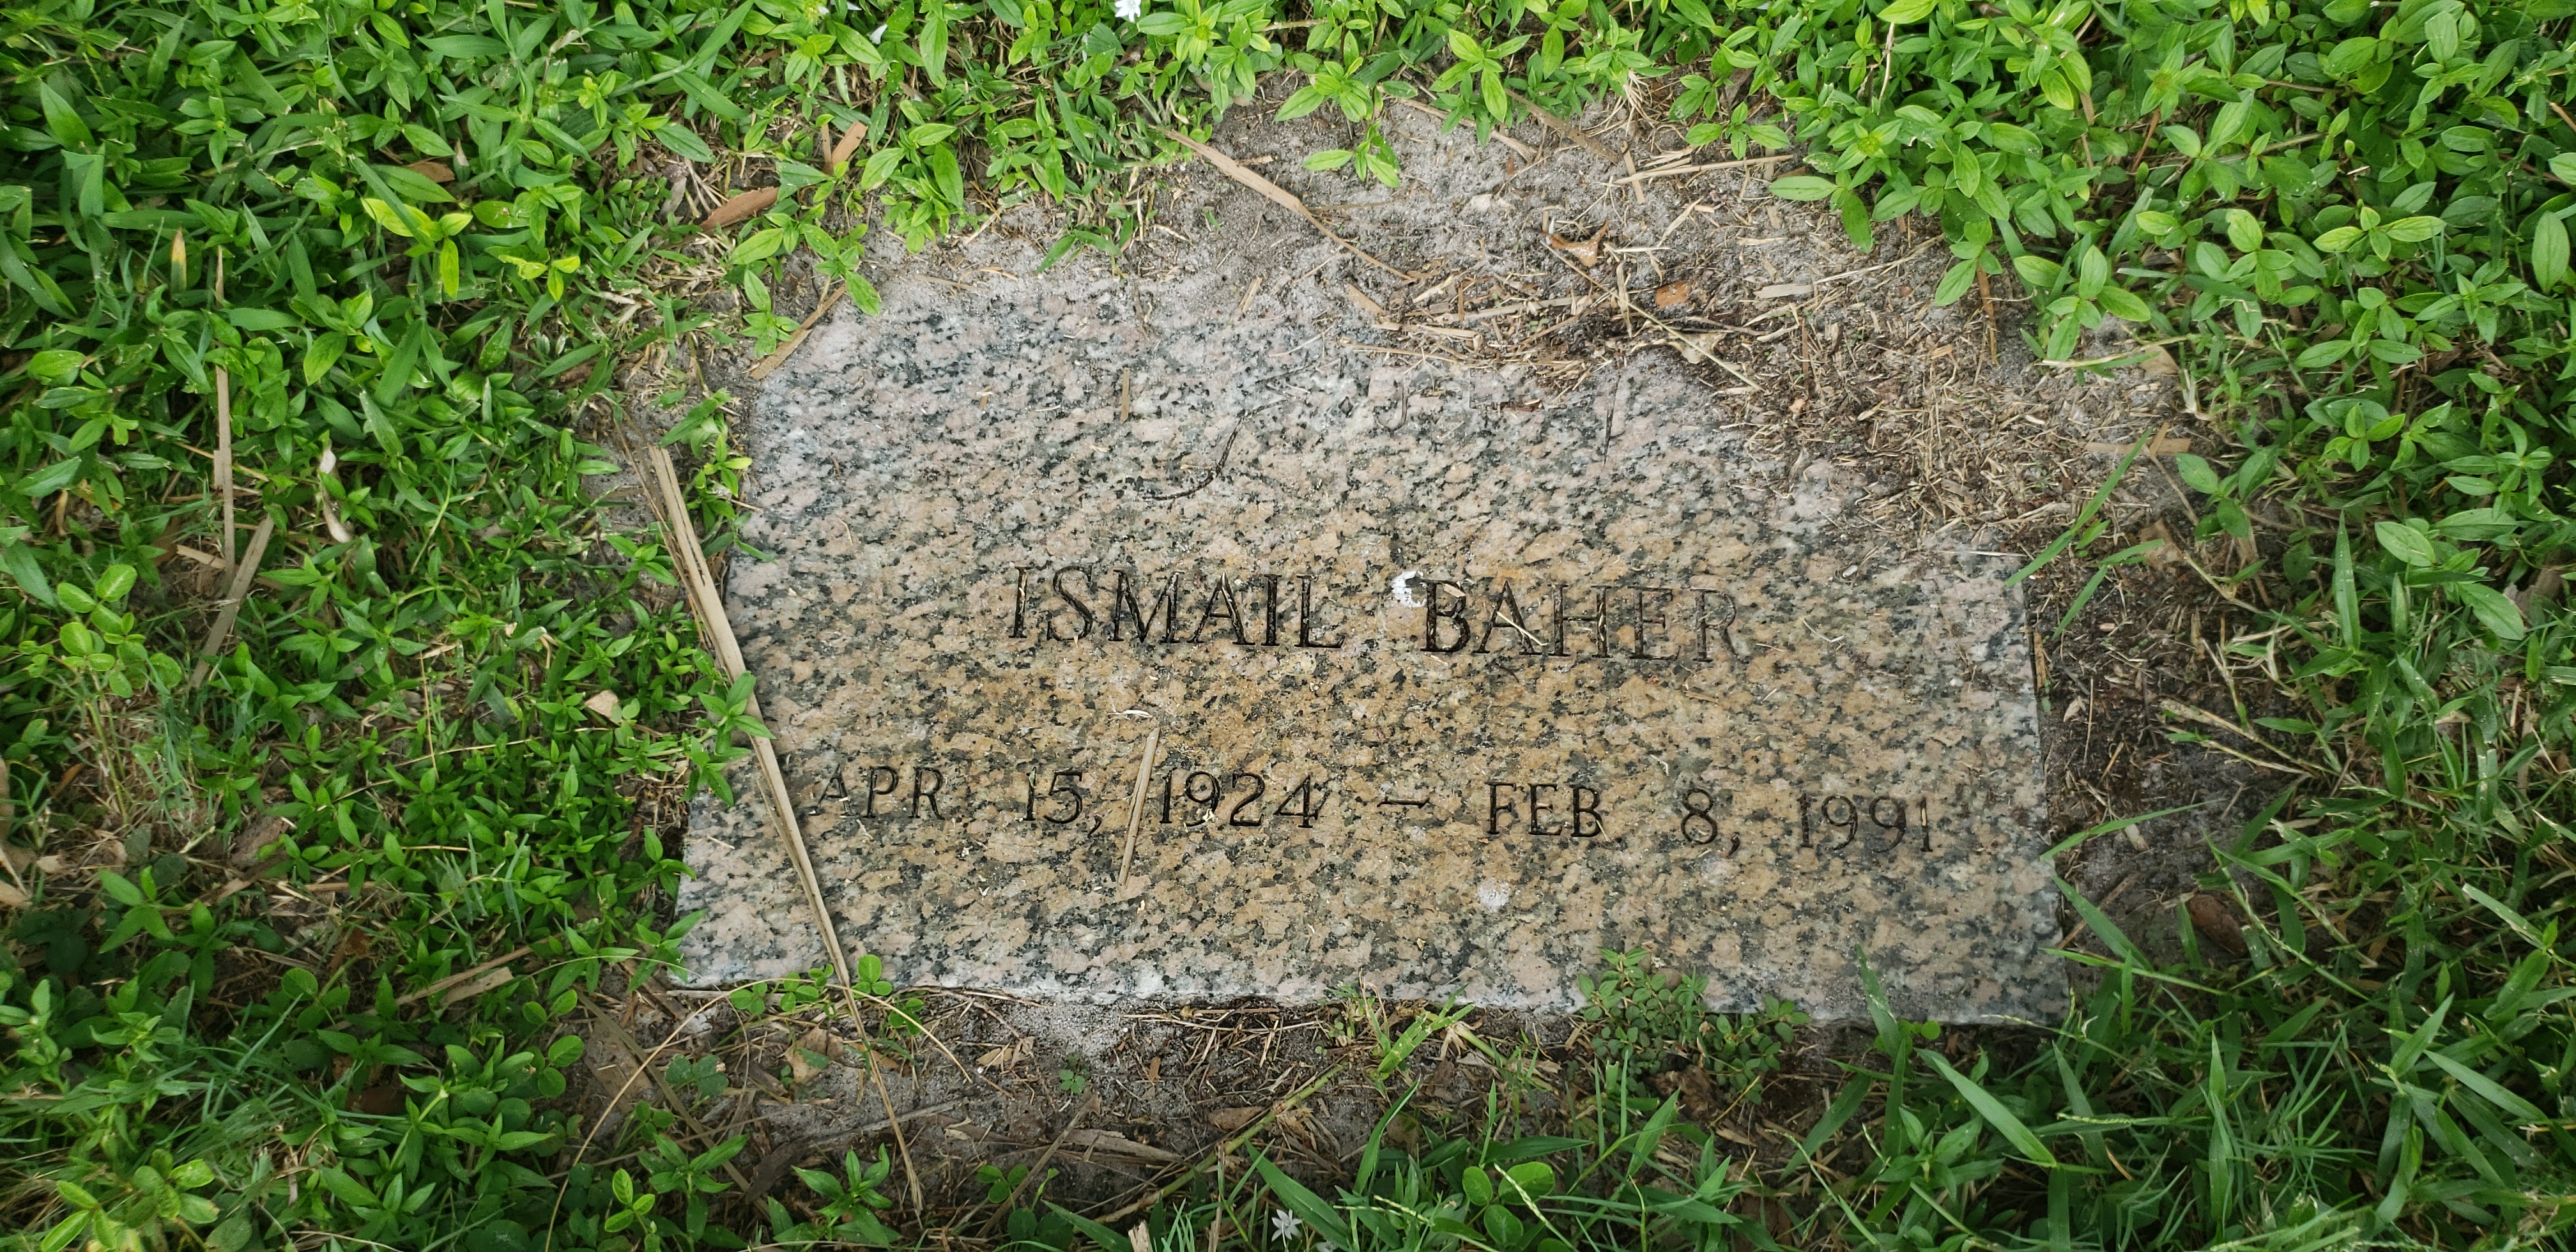 Ismail Baher